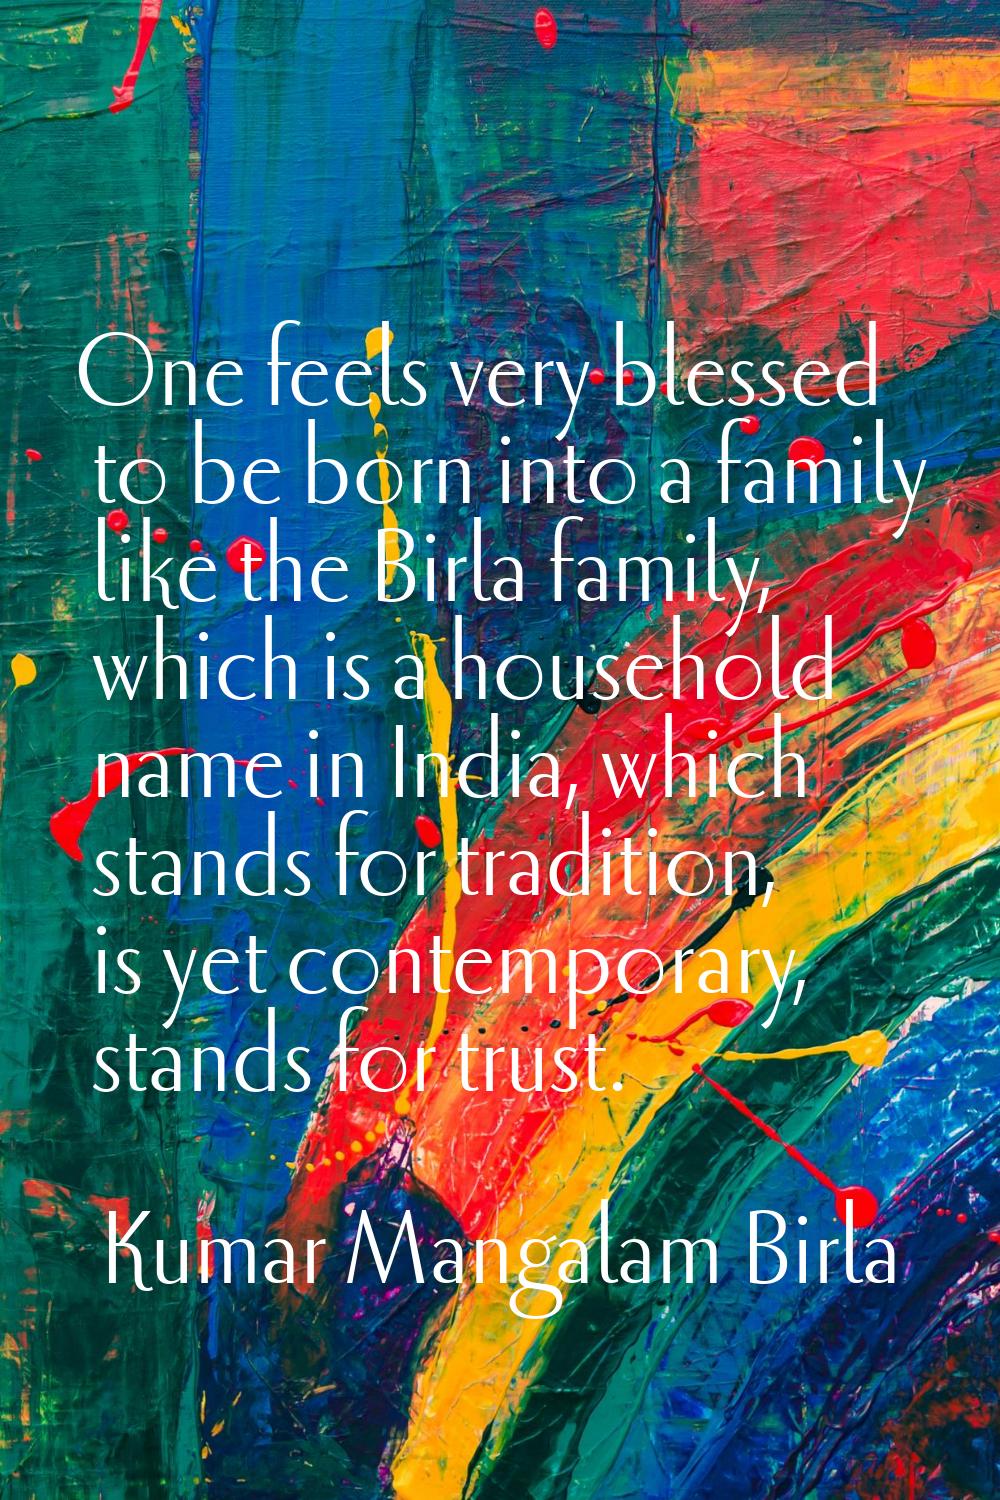 One feels very blessed to be born into a family like the Birla family, which is a household name in